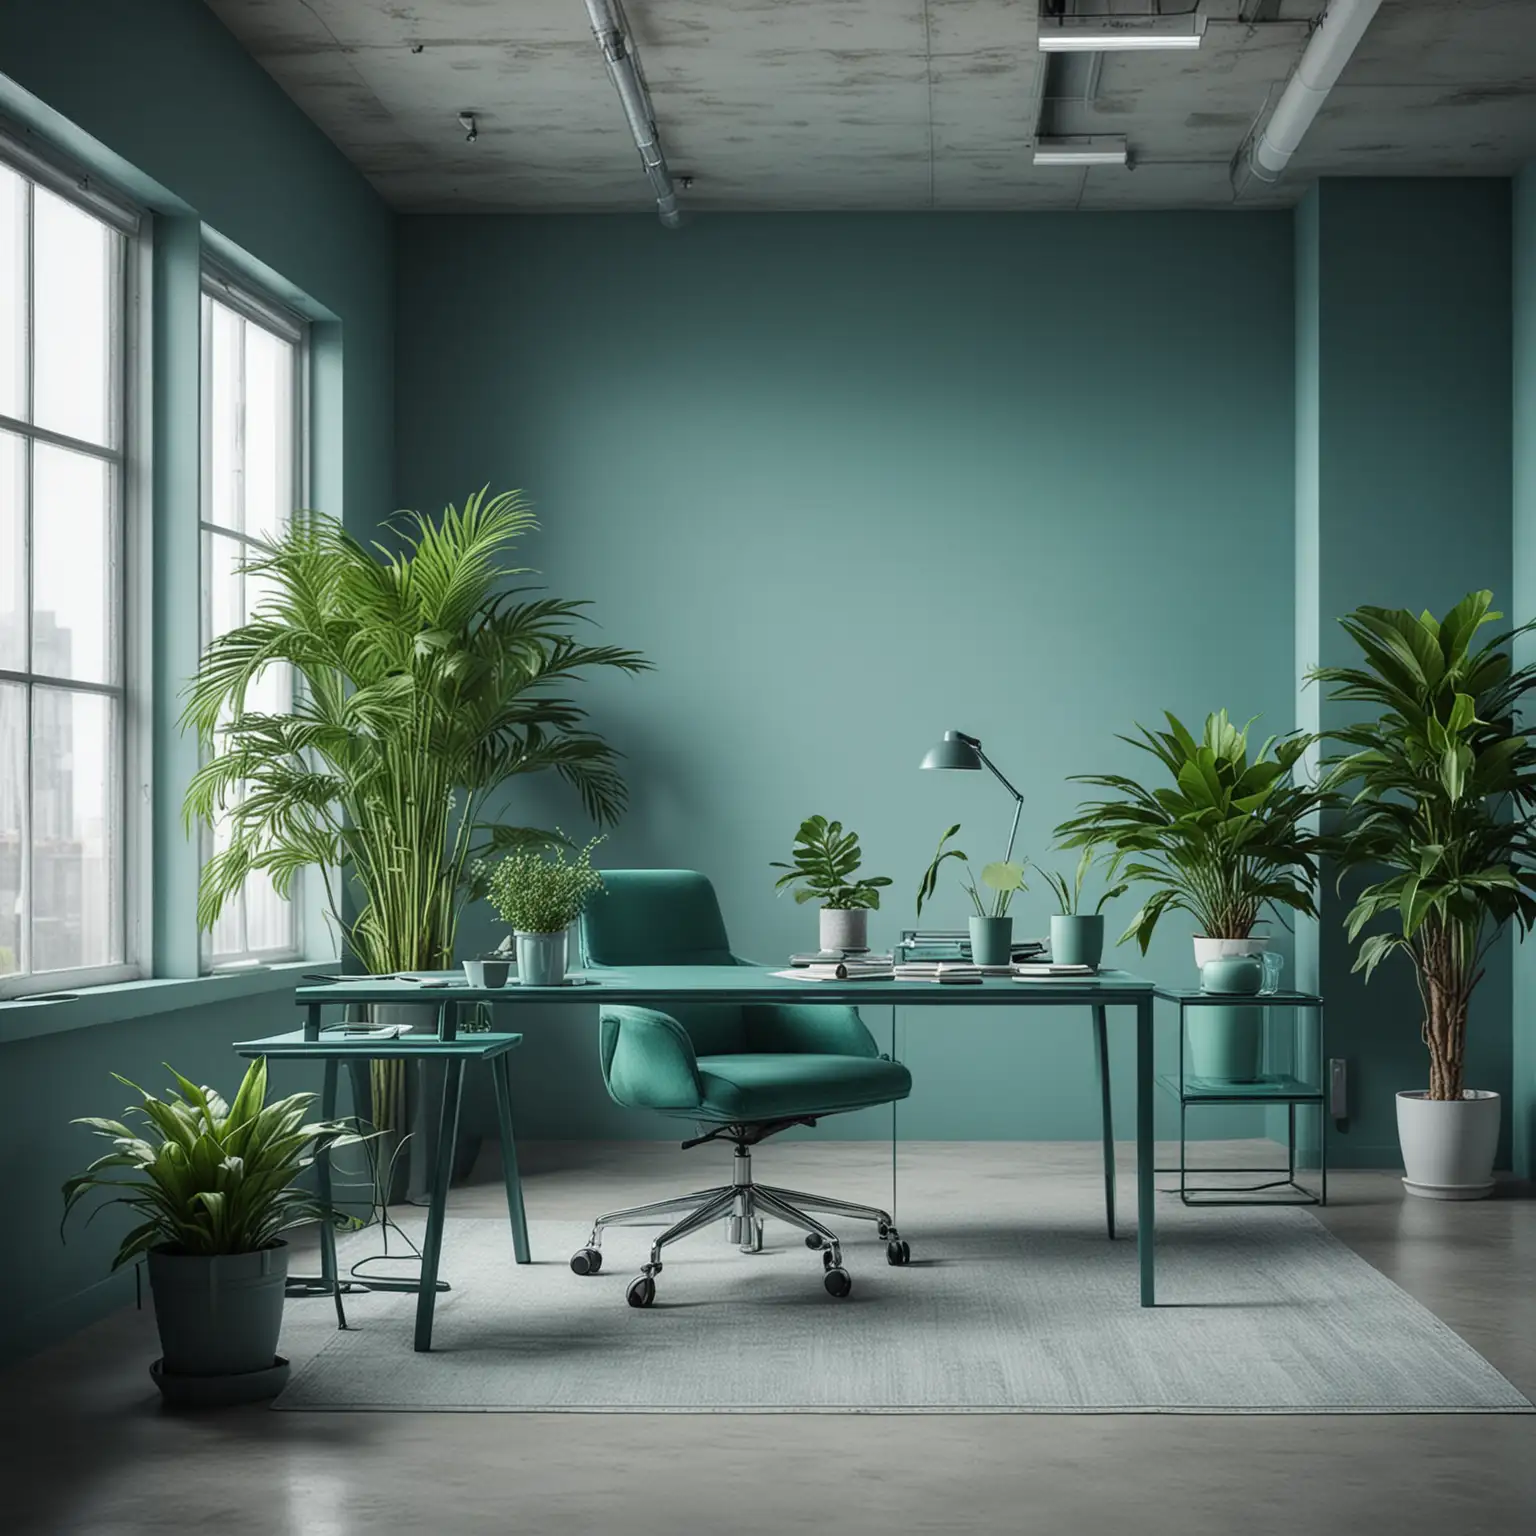 create a hyper realistic series of stock photos with a harmonious blue and green color palette. the images should evoke a sense of tranquility, professionalism, and freshness. Include a scene such as a modern office space with a blue and green decor, featuring sleek furniture and indoor plants 